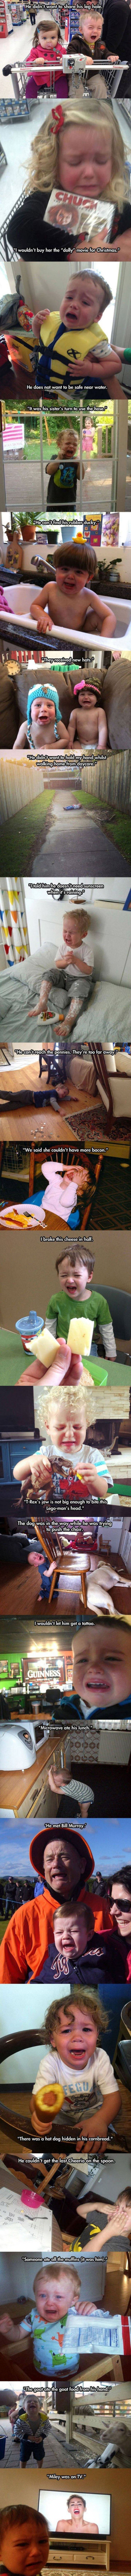 why kids cry funny picture